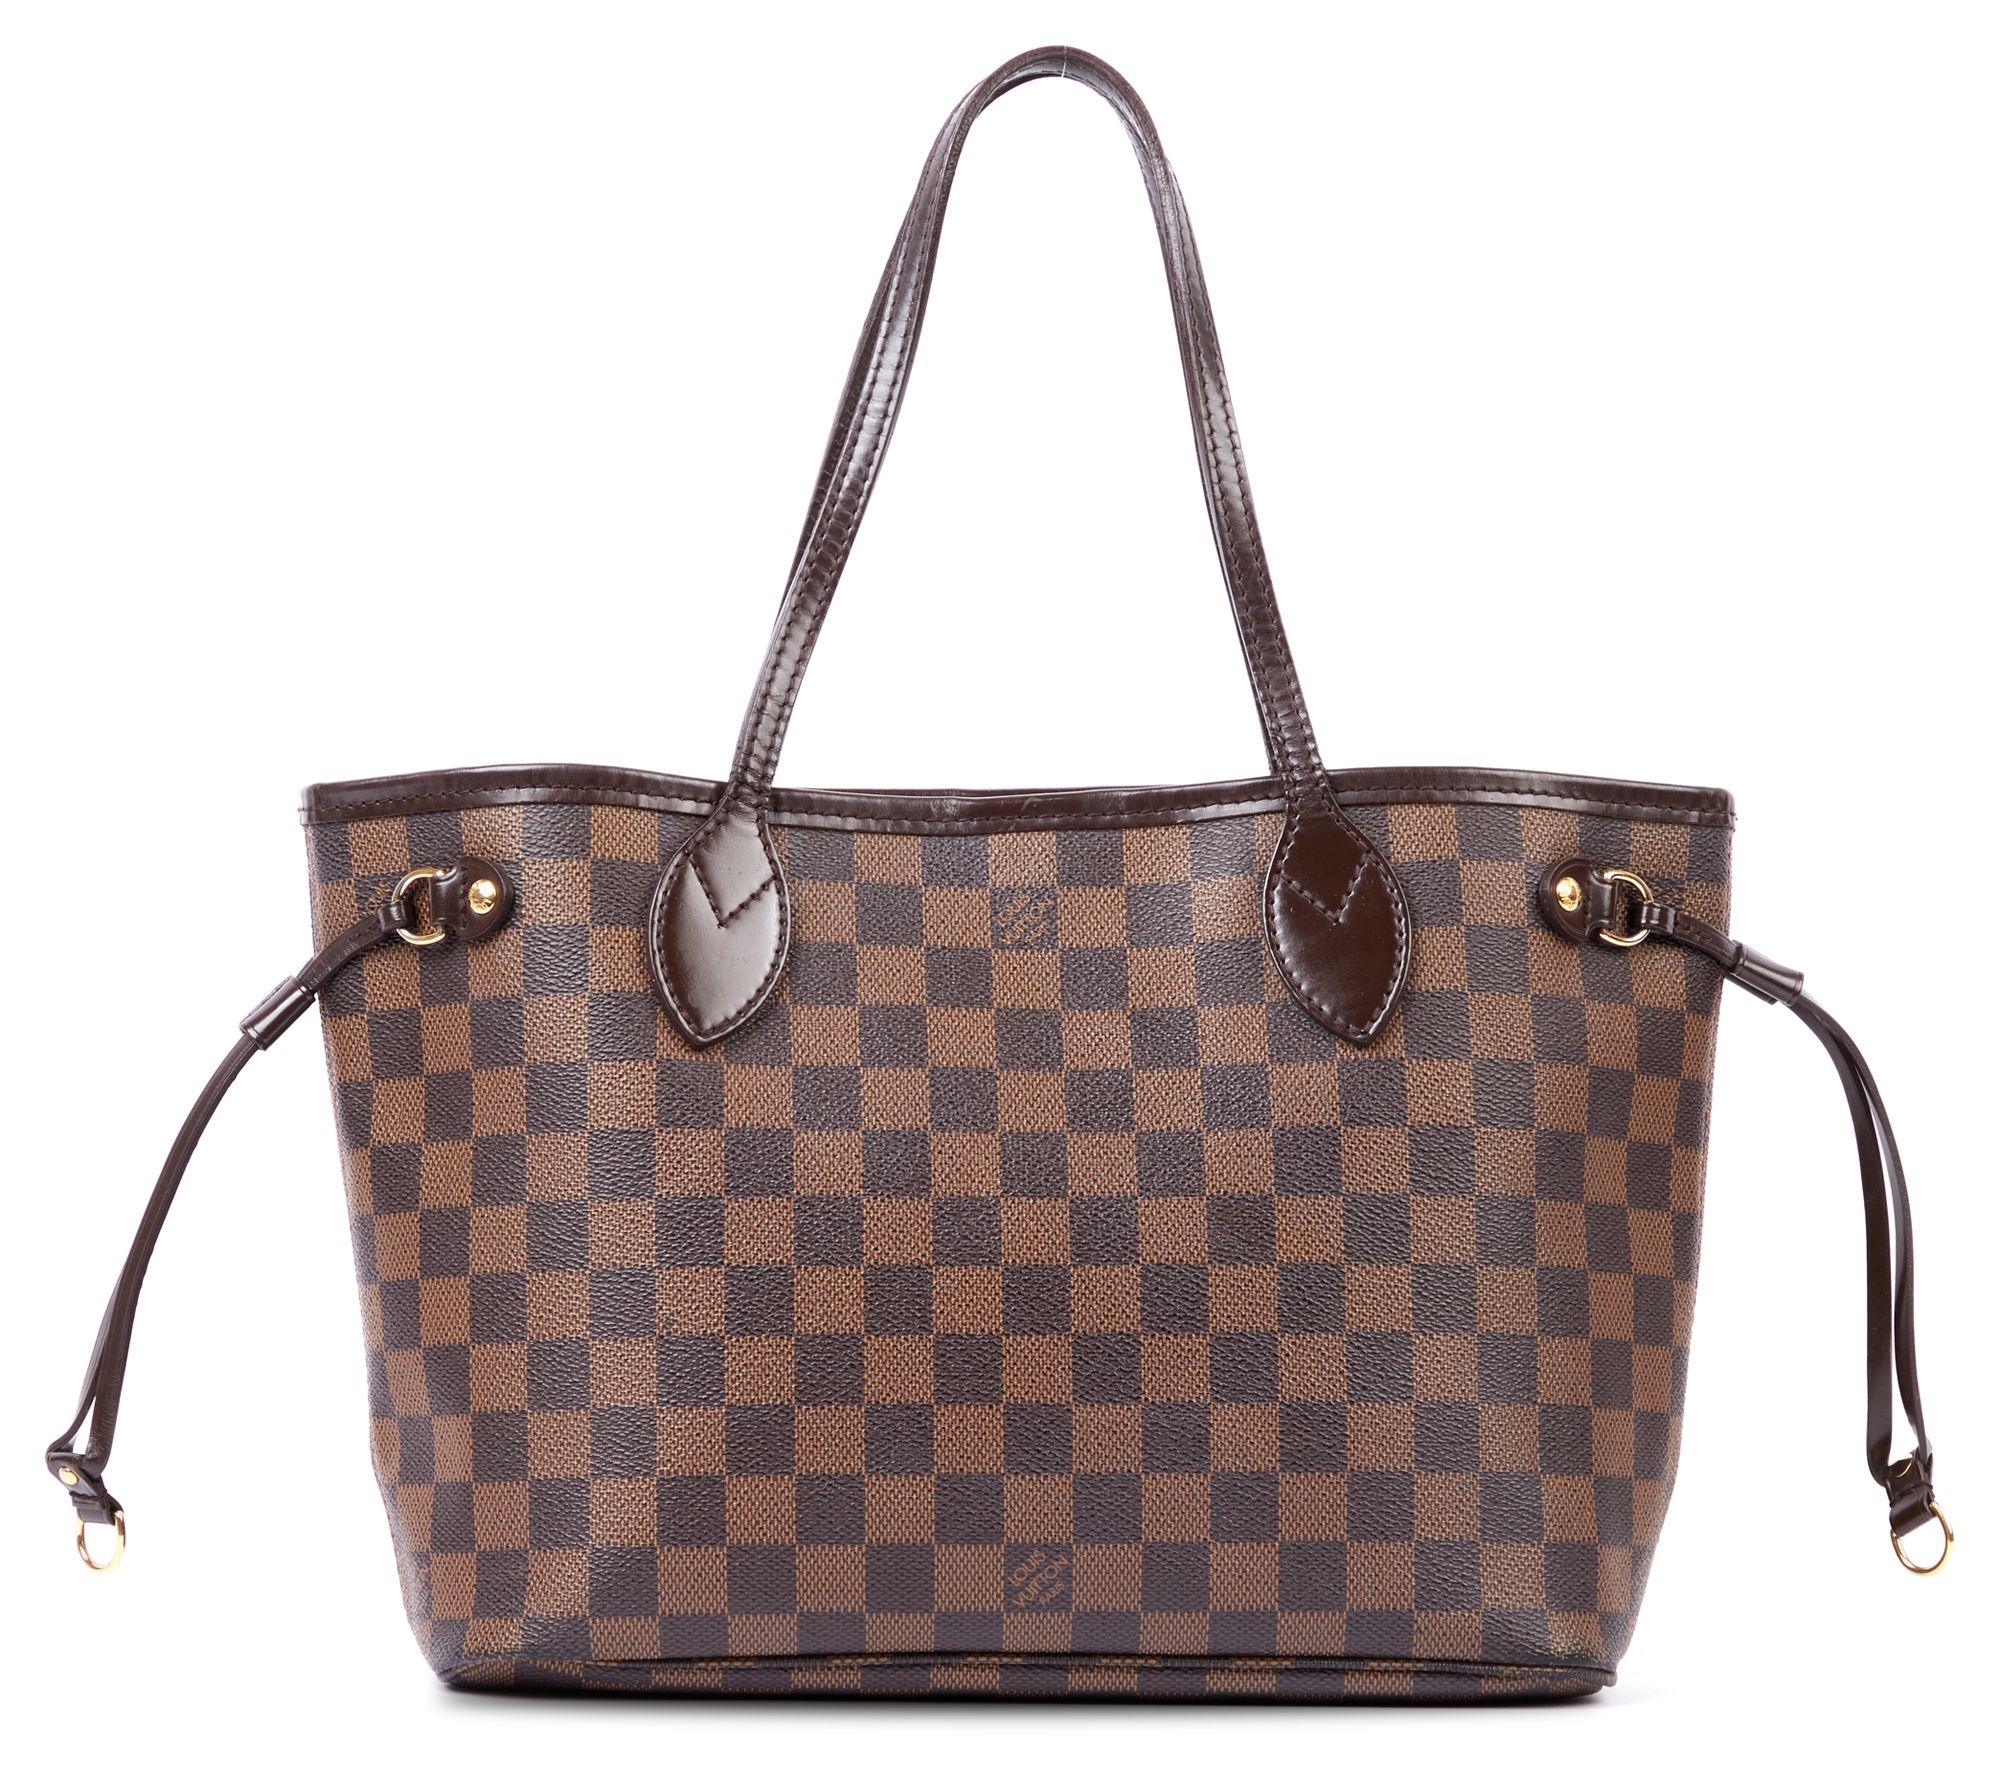 LOUIS VUITTON Authentic Women's Tote Bag Neverfull PM Damier White  Leather